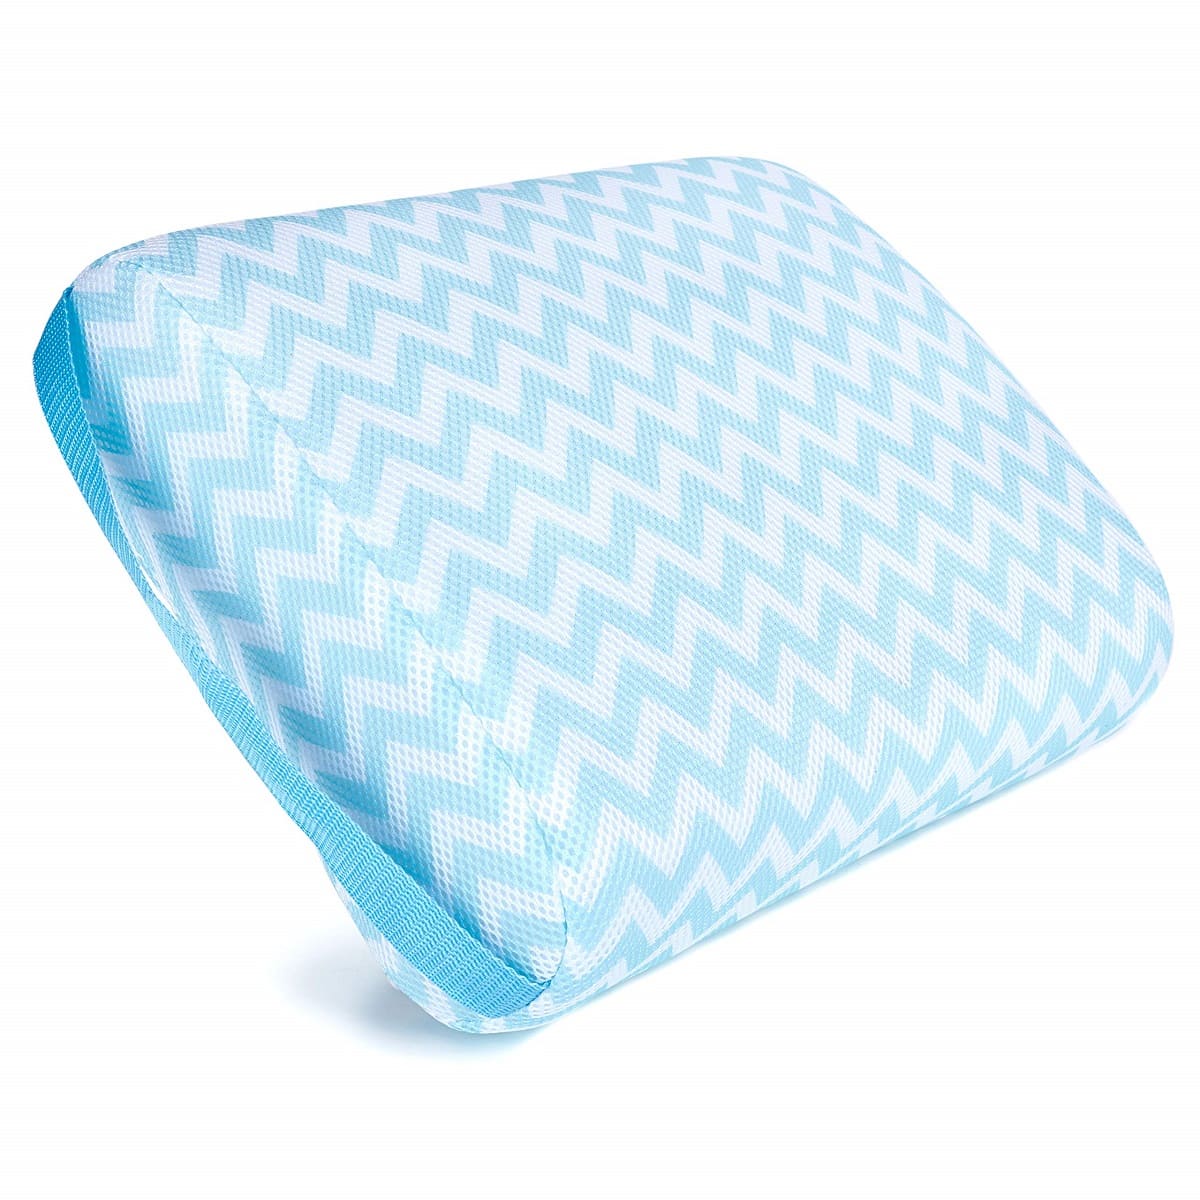 15 Best Hot Tub Seat Cushion For 2023